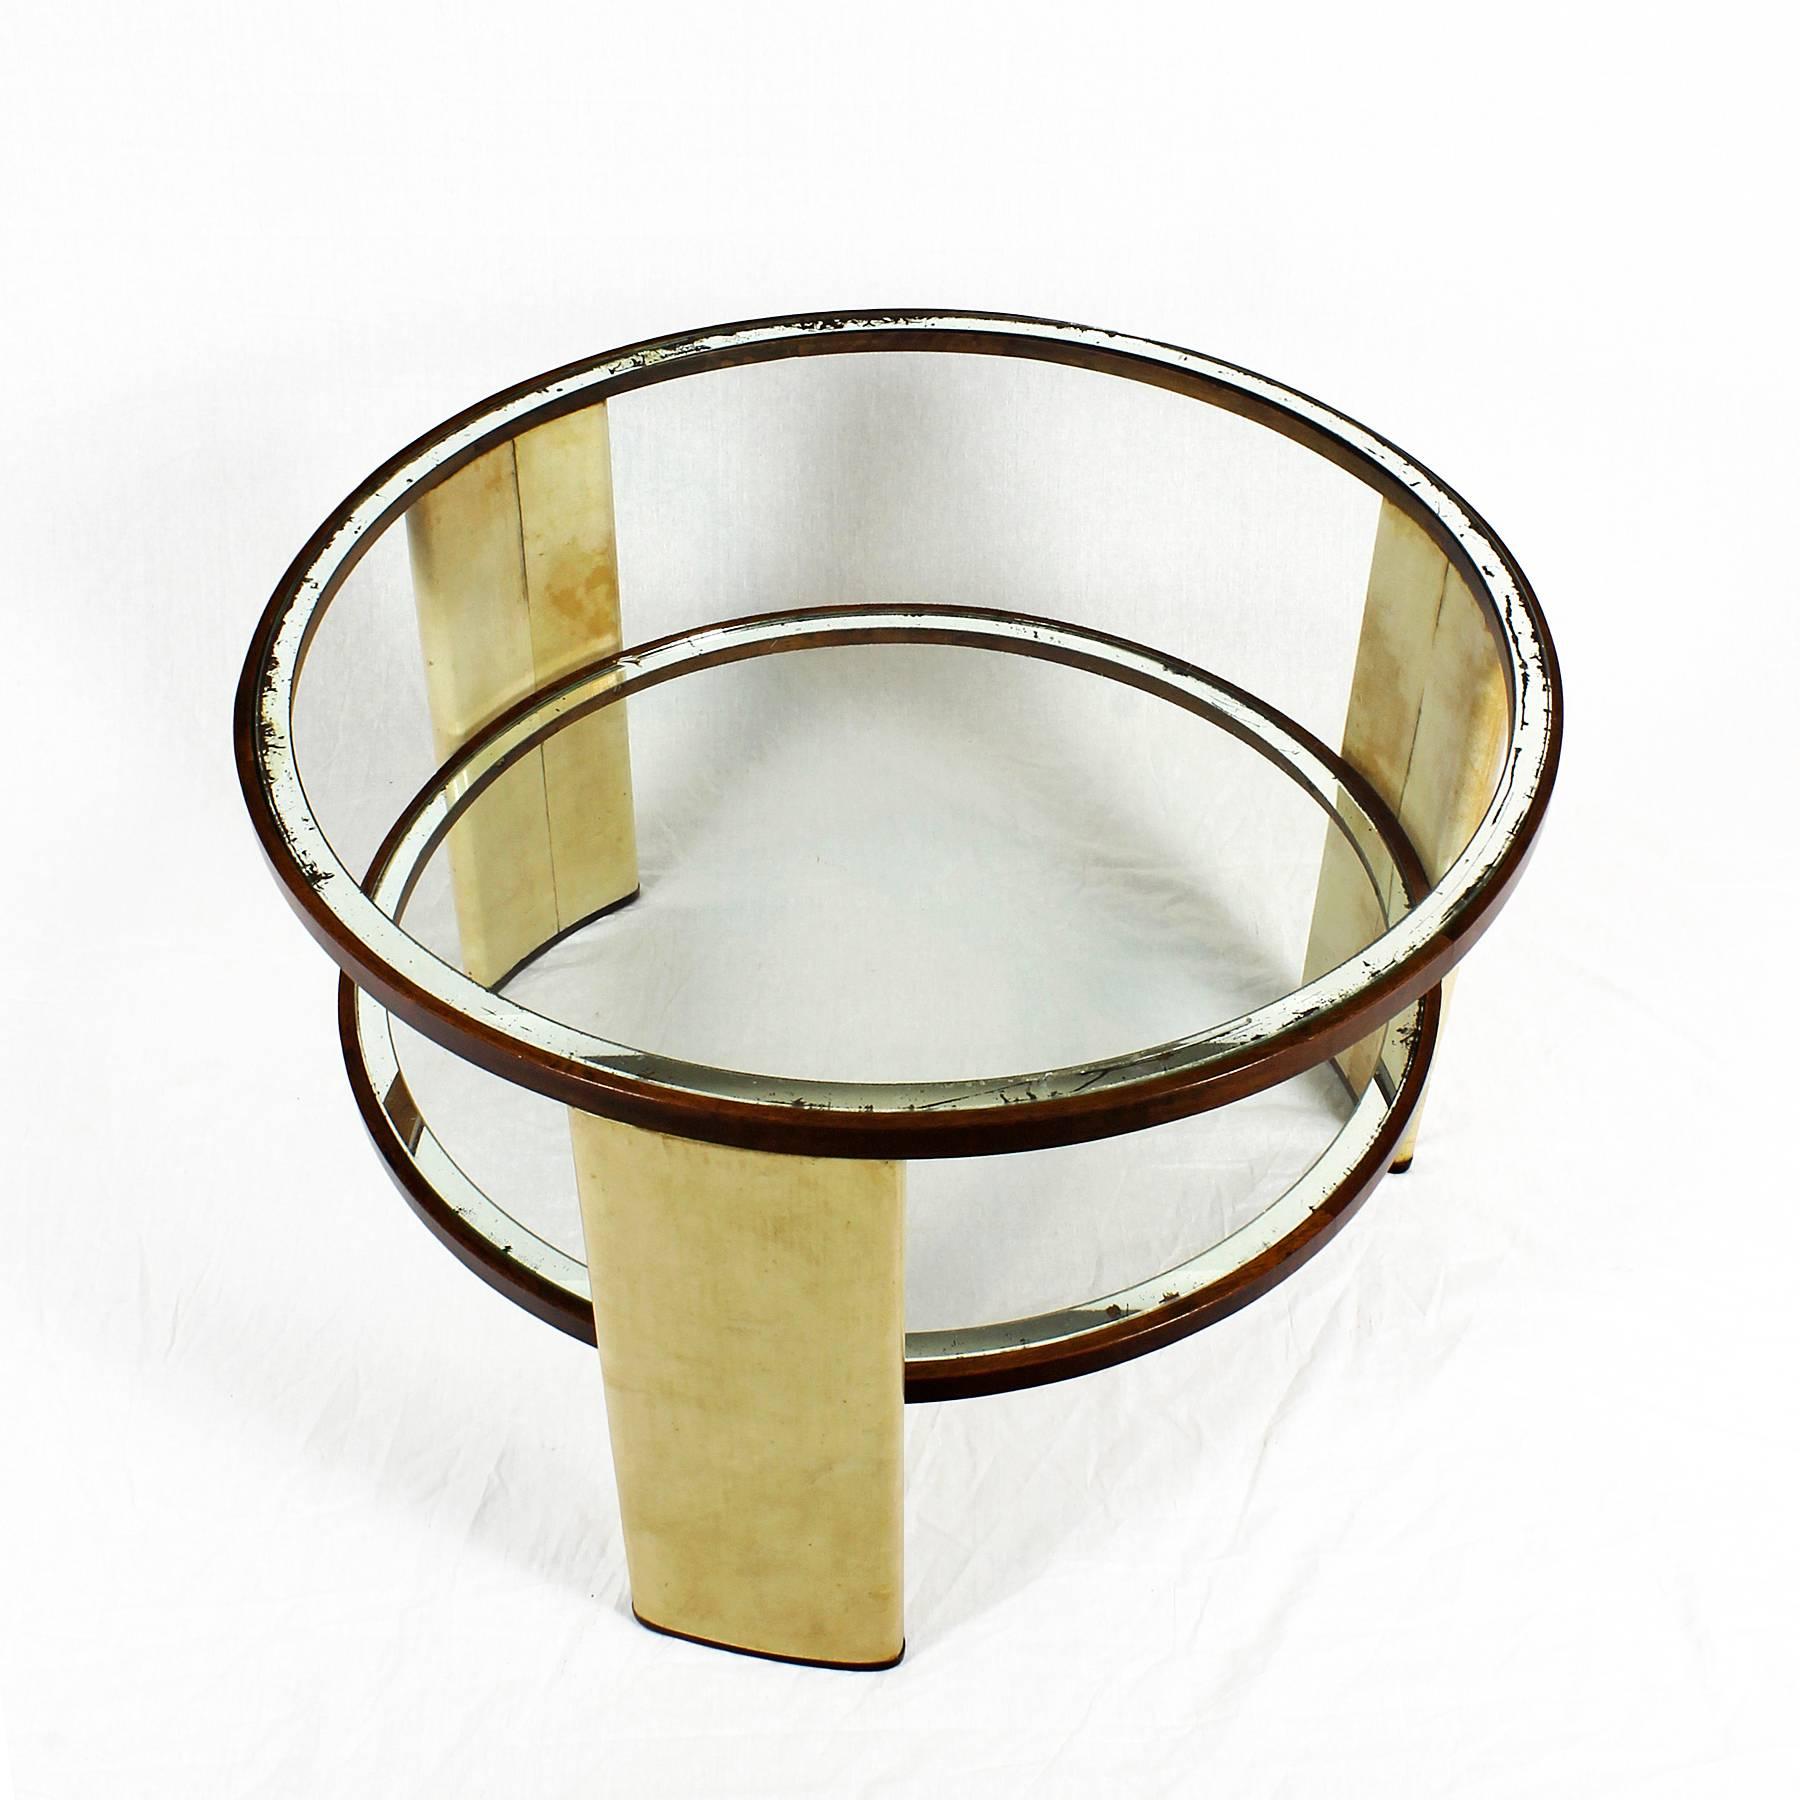 Italian 1930s Art Deco Side Table, parchment and walnut, mirrored glass. Italy